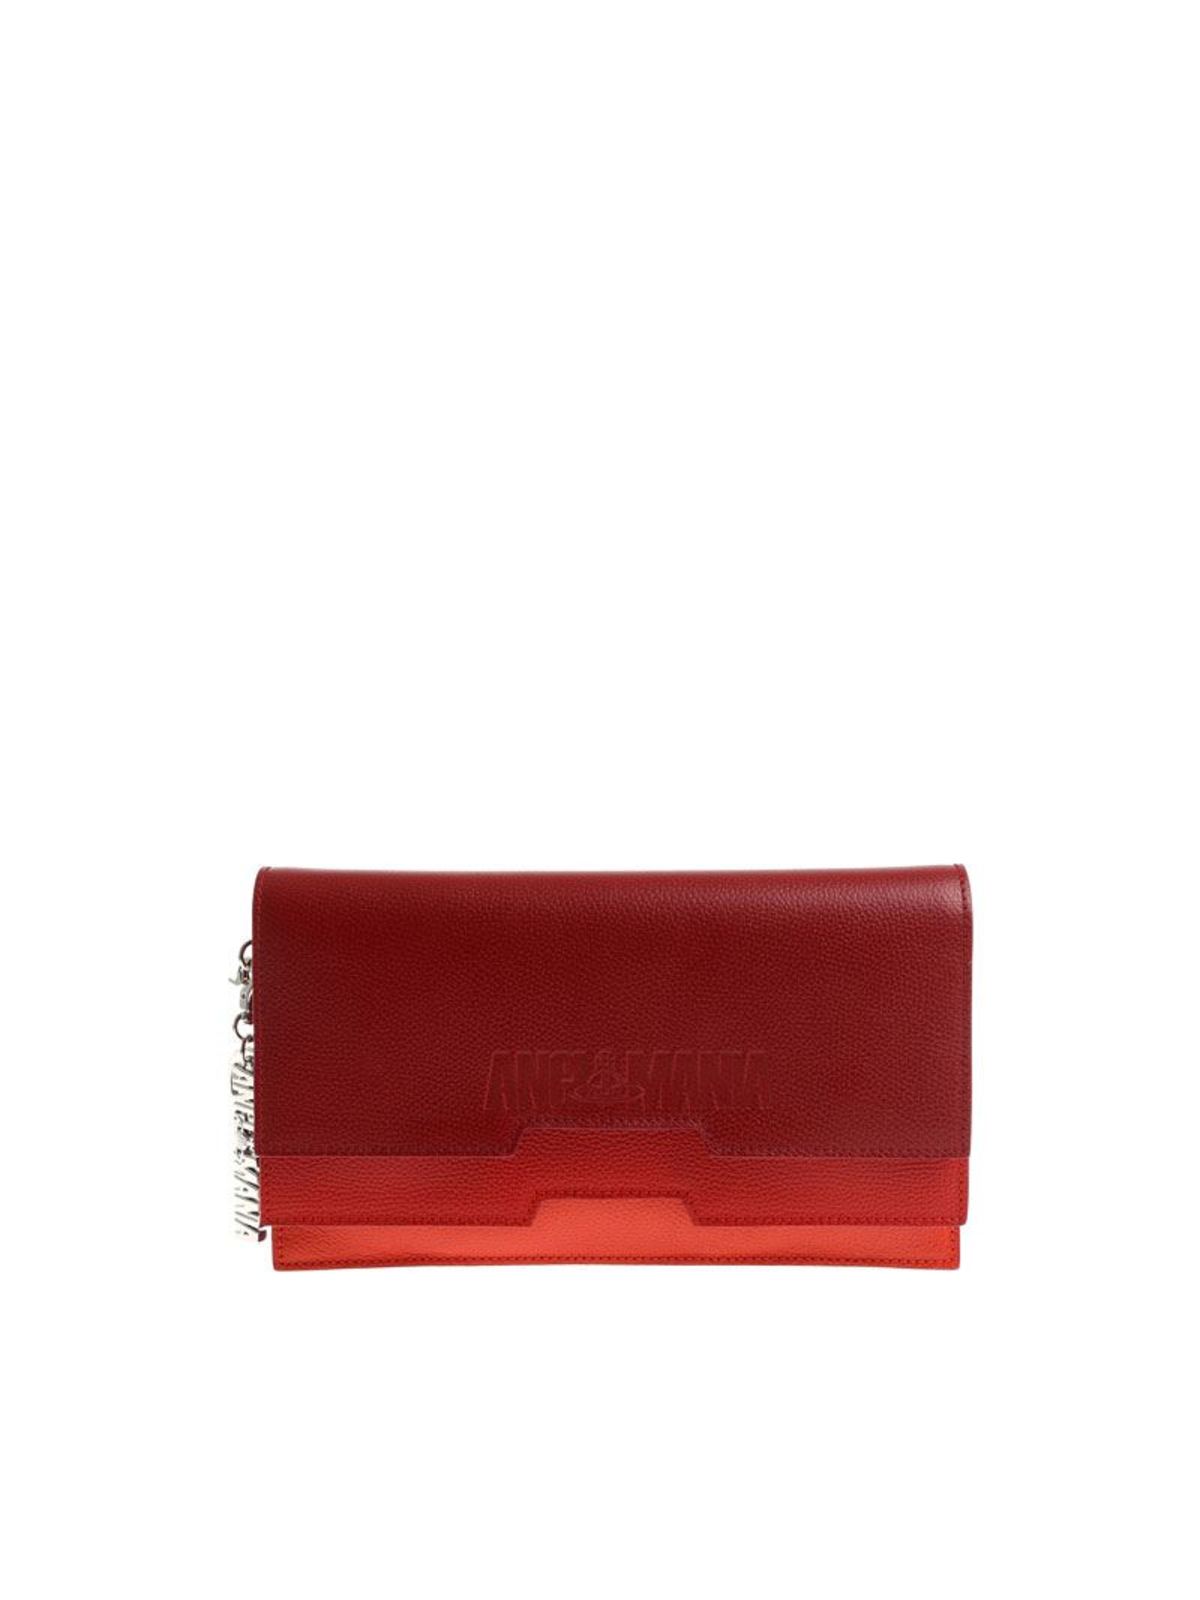 Vivienne Westwood Anglomania Grainy Leather Clutch In Rojo